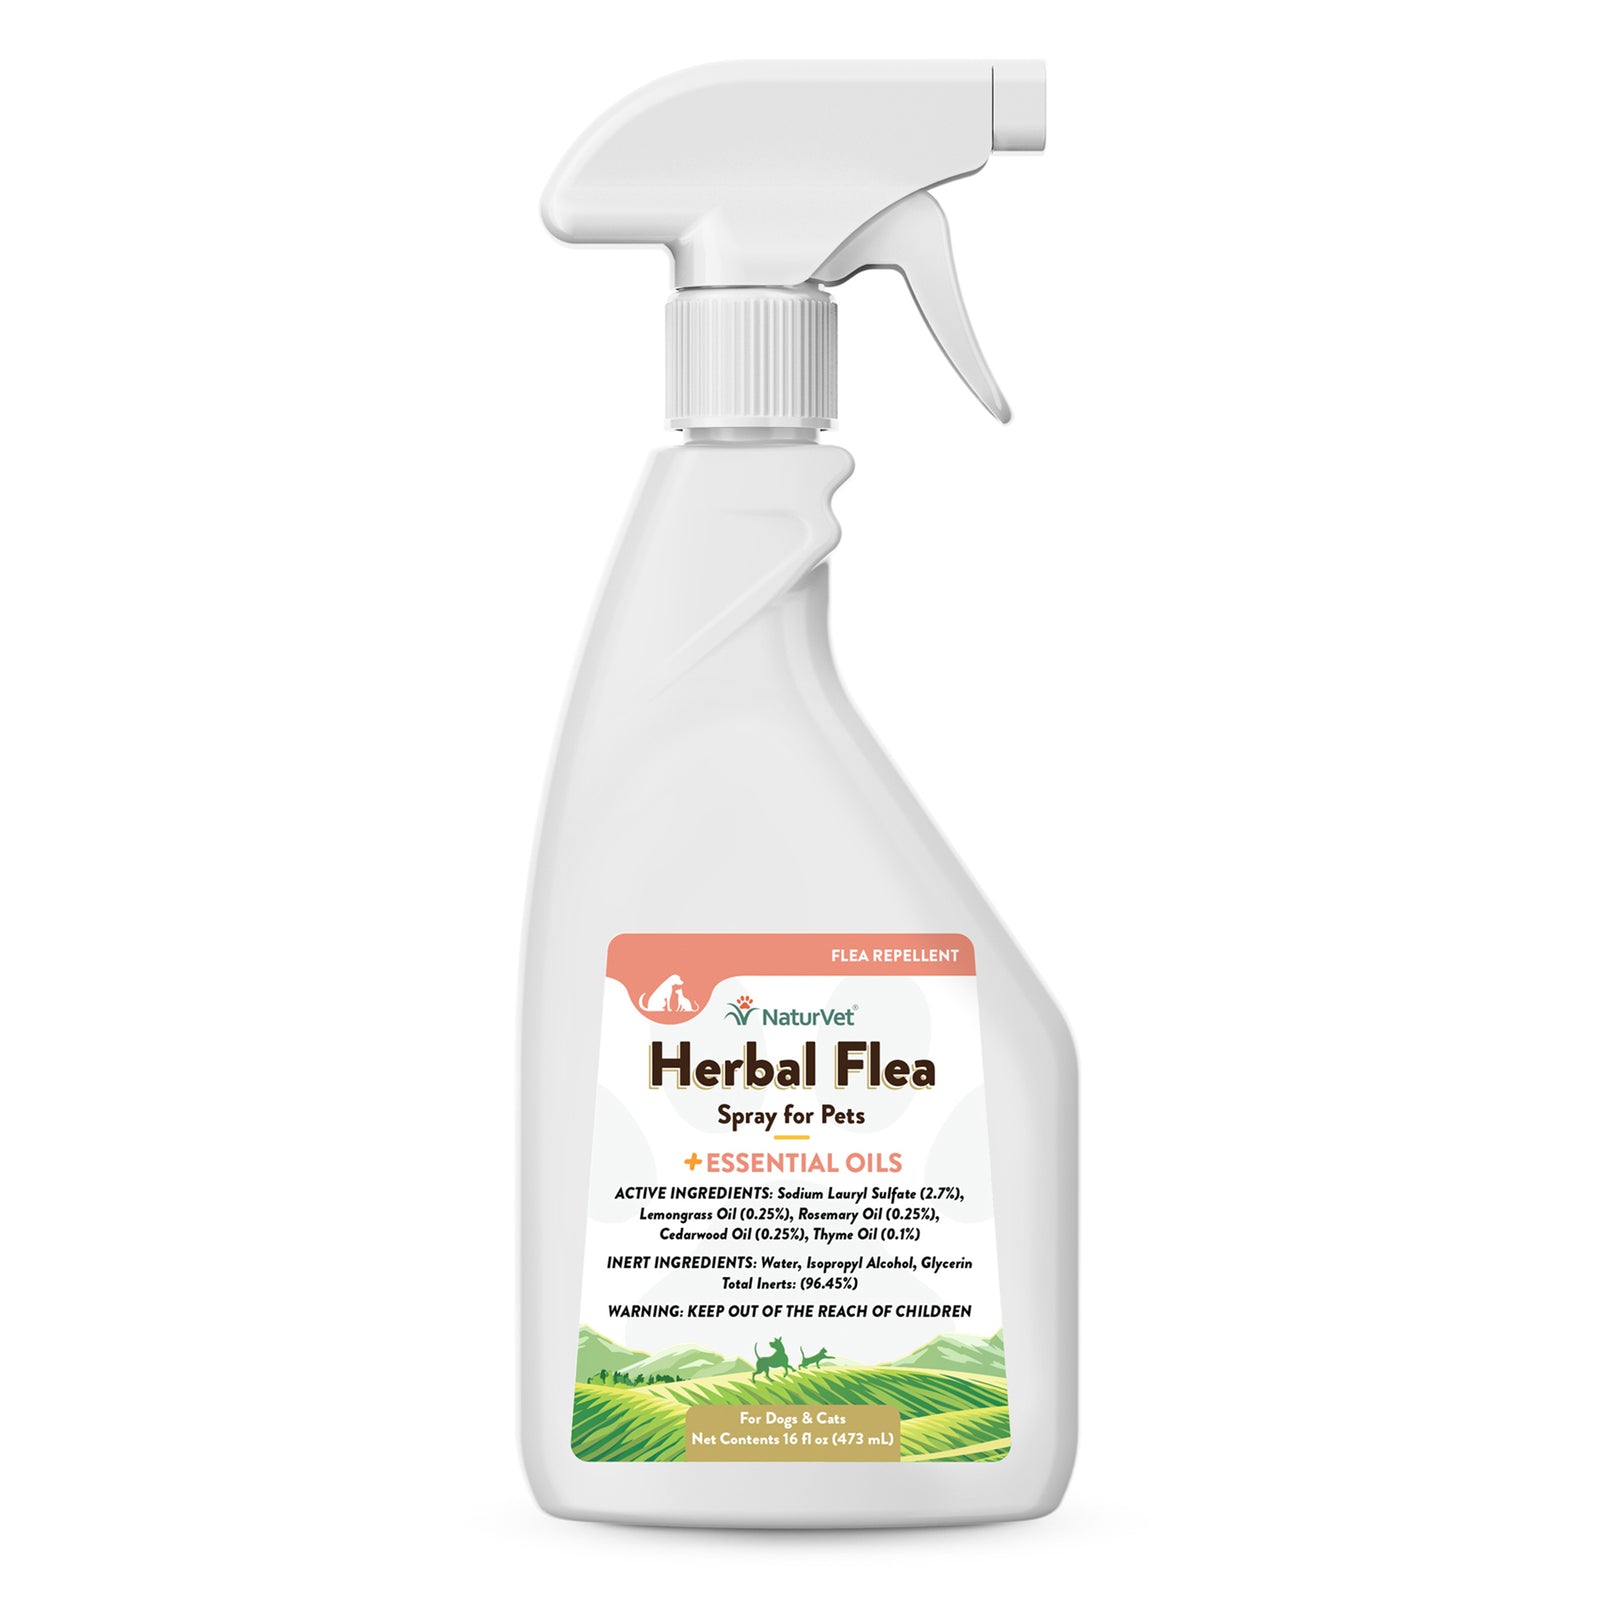 NaturVet Herbal Flea Spray with Essential Oils for Dogs and Cats 16oz